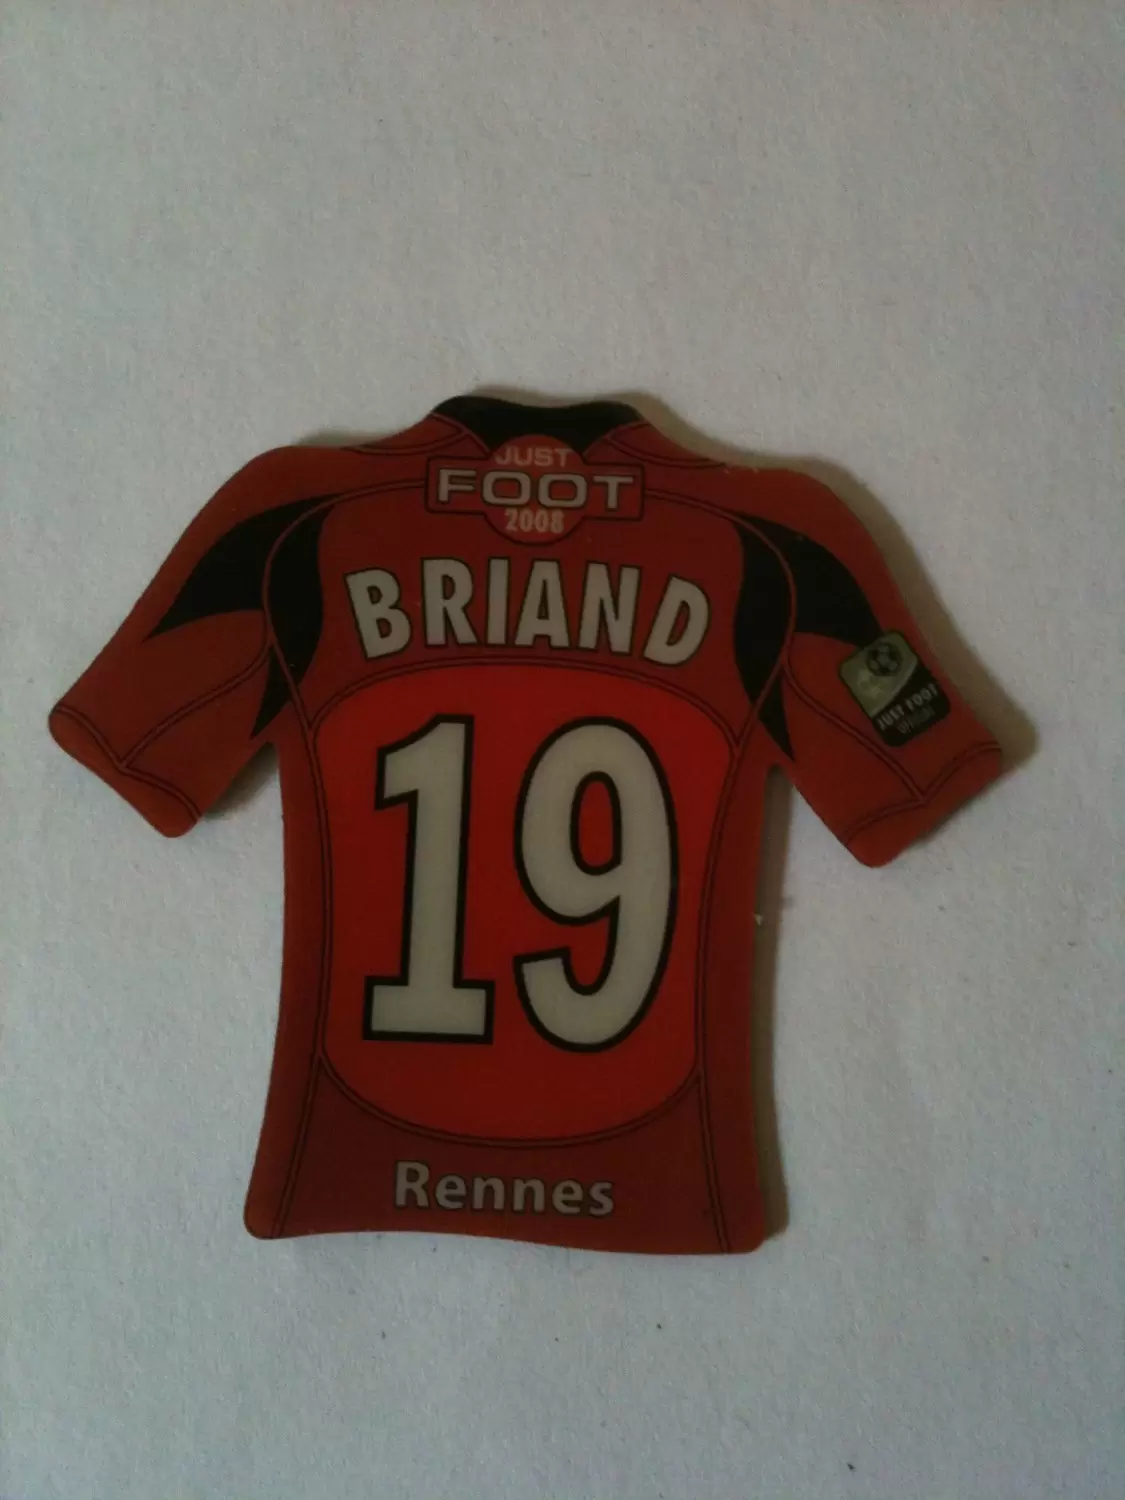 Just Foot 2008 - Rennes 19 - Briand